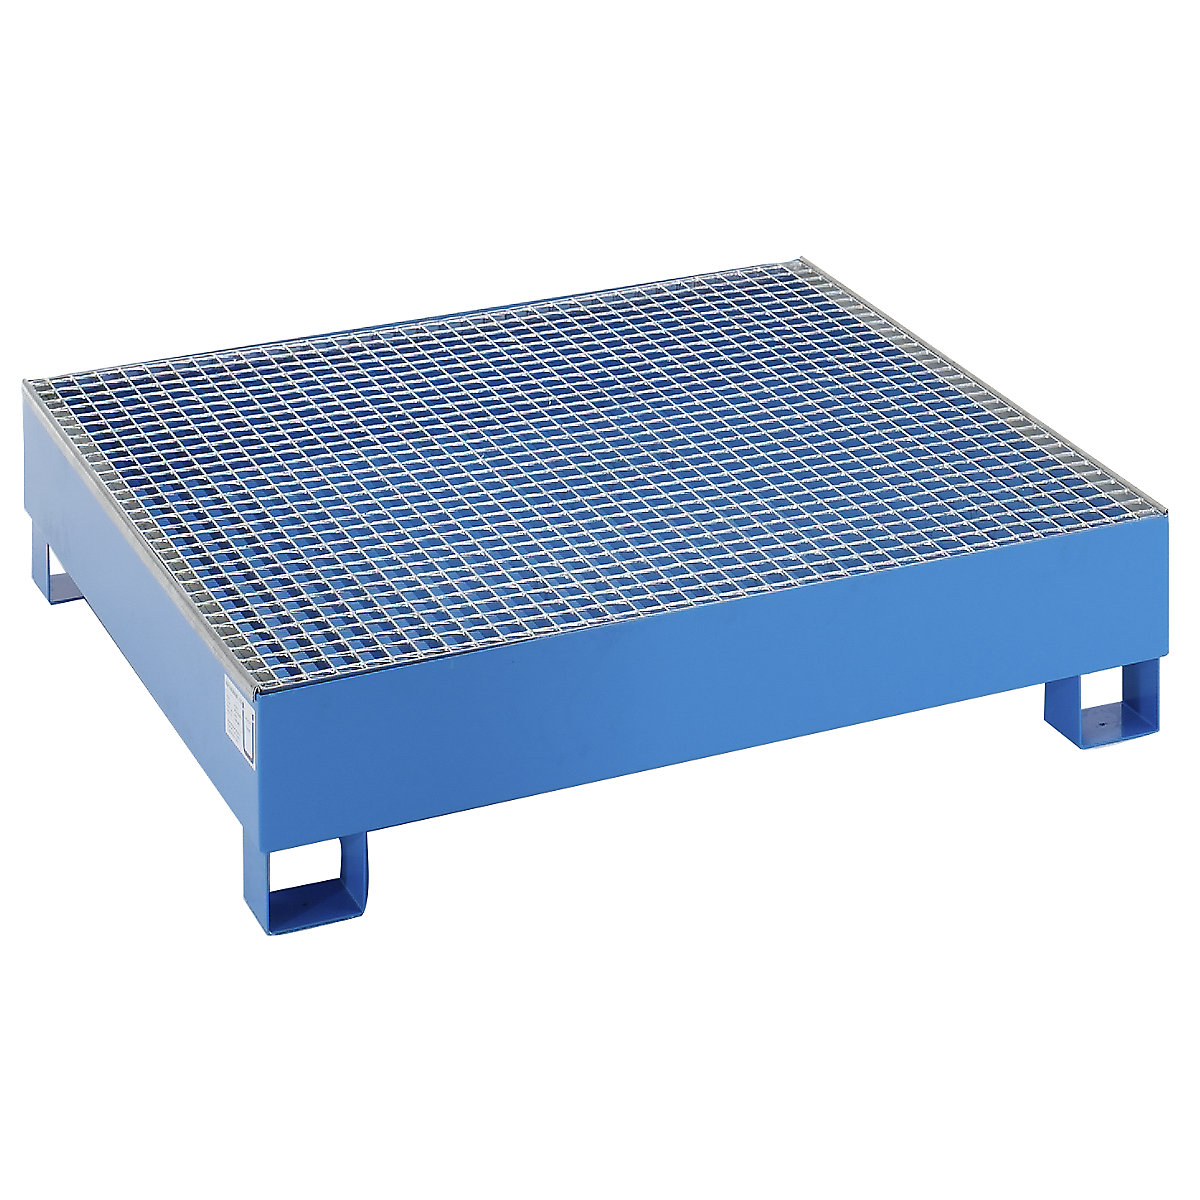 Steel sump tray for 200 l drums – eurokraft basic, LxWxH 1200 x 1200 x 285 mm, without certification, powder coated blue, with grate-3